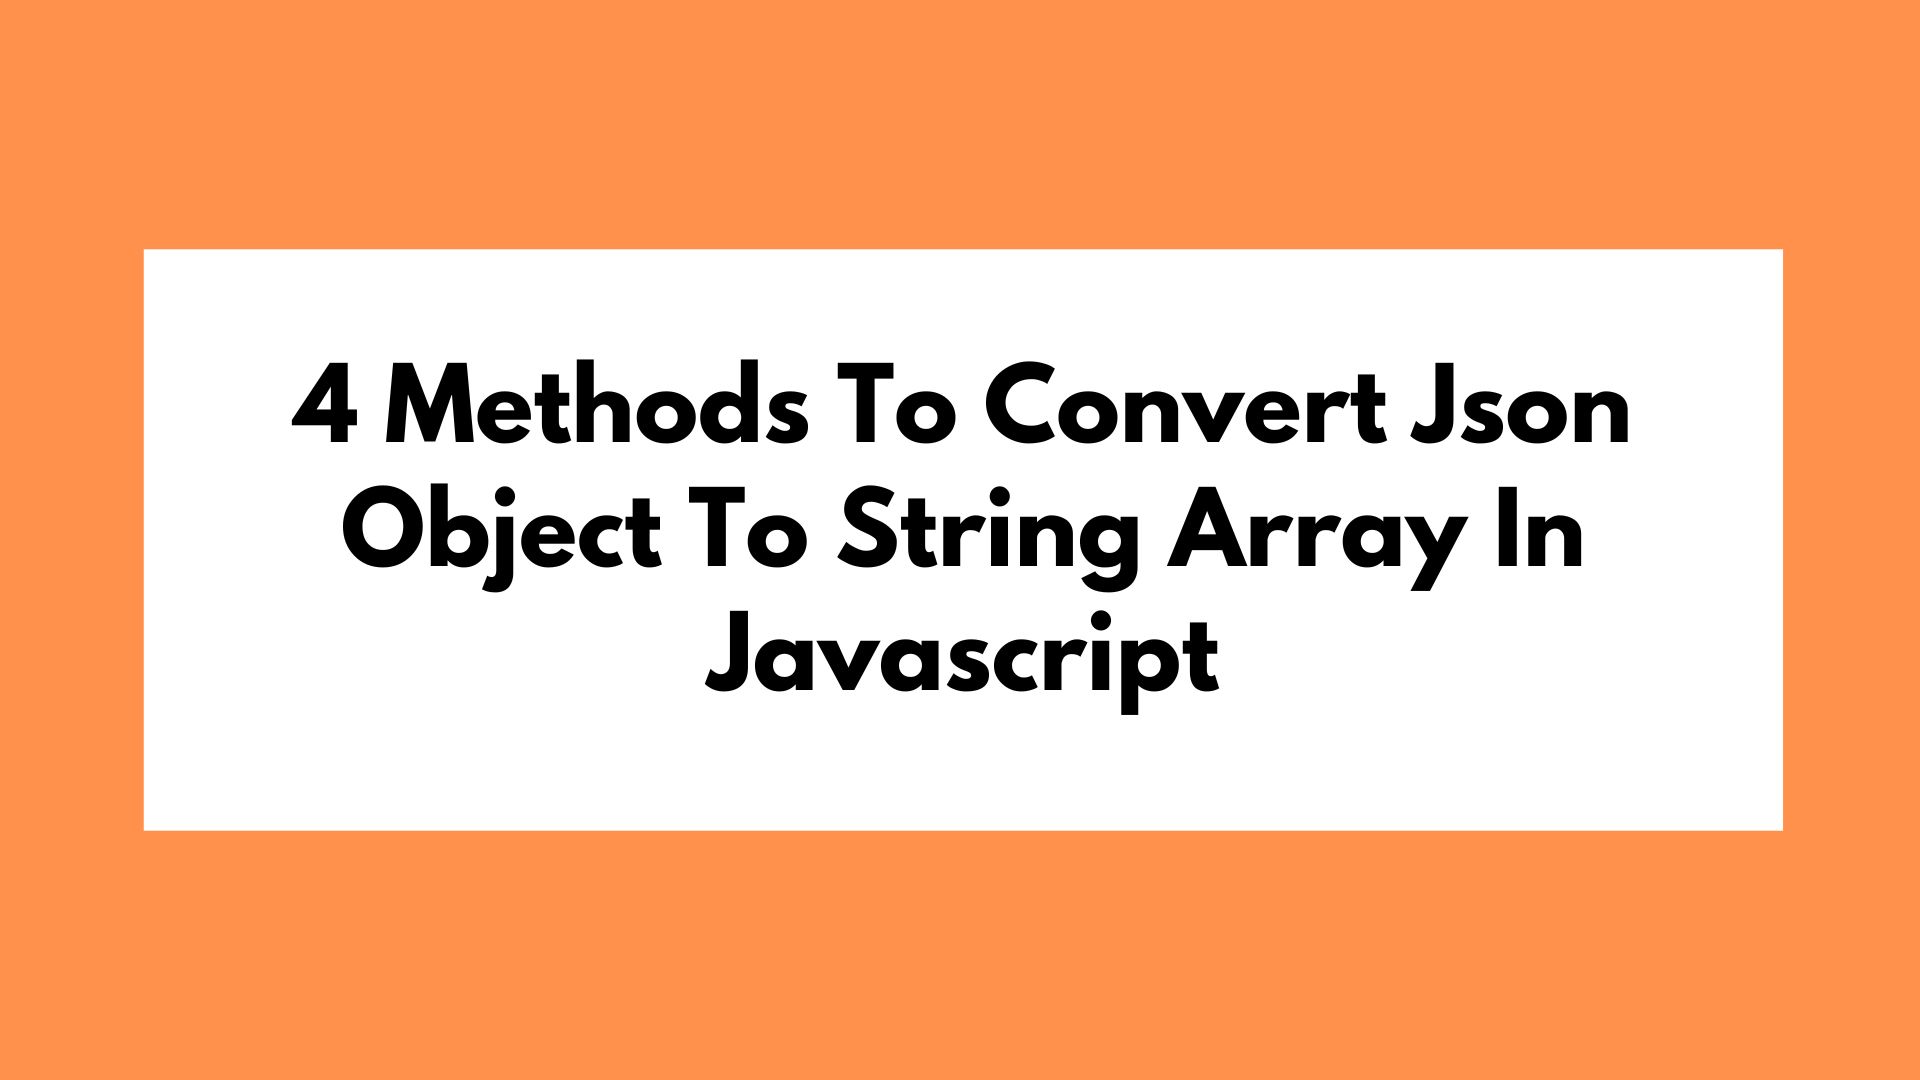 4 Methods To Convert Json Object To String Array In Javascript